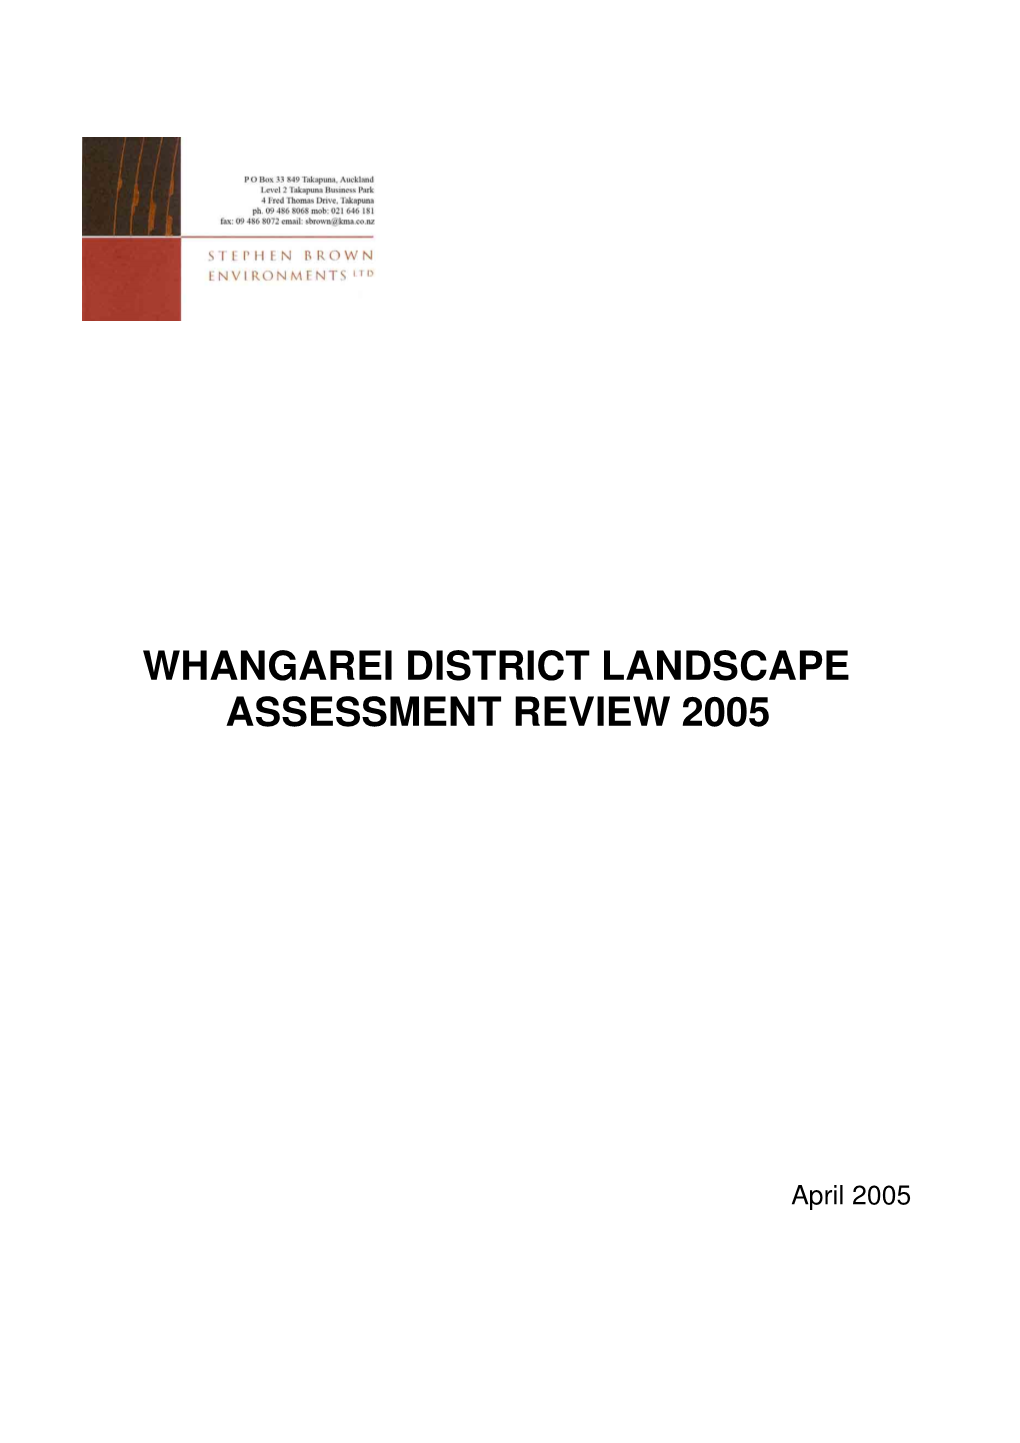 Whangarei District Landscape Assessment Review 2005